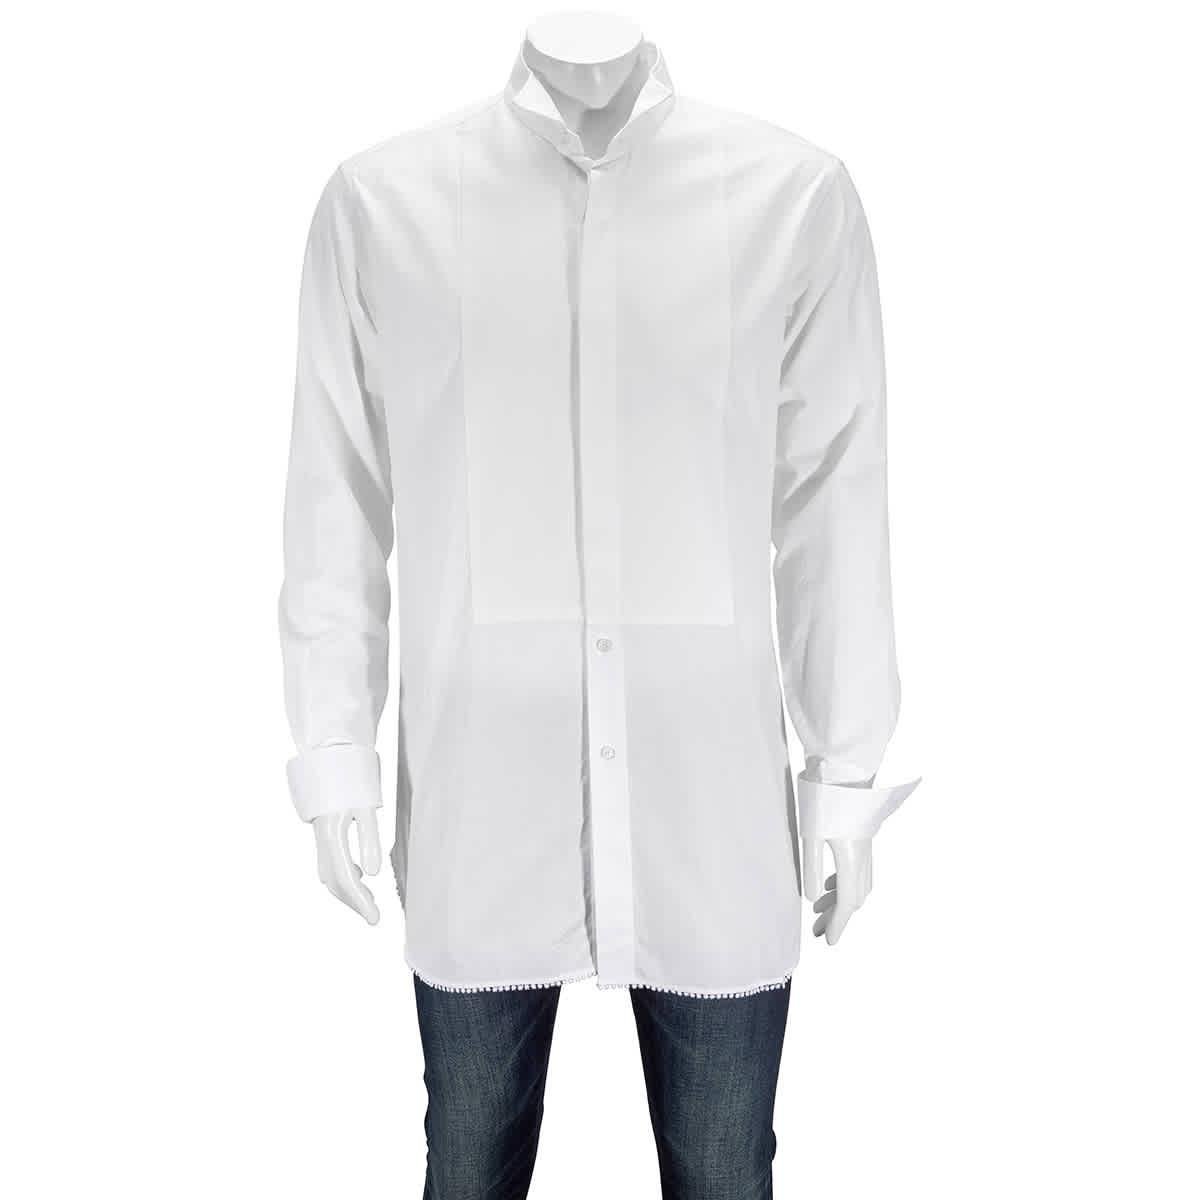 Burberry Mens Loxton Trim Fit Dress Shirt In White by BURBERRY